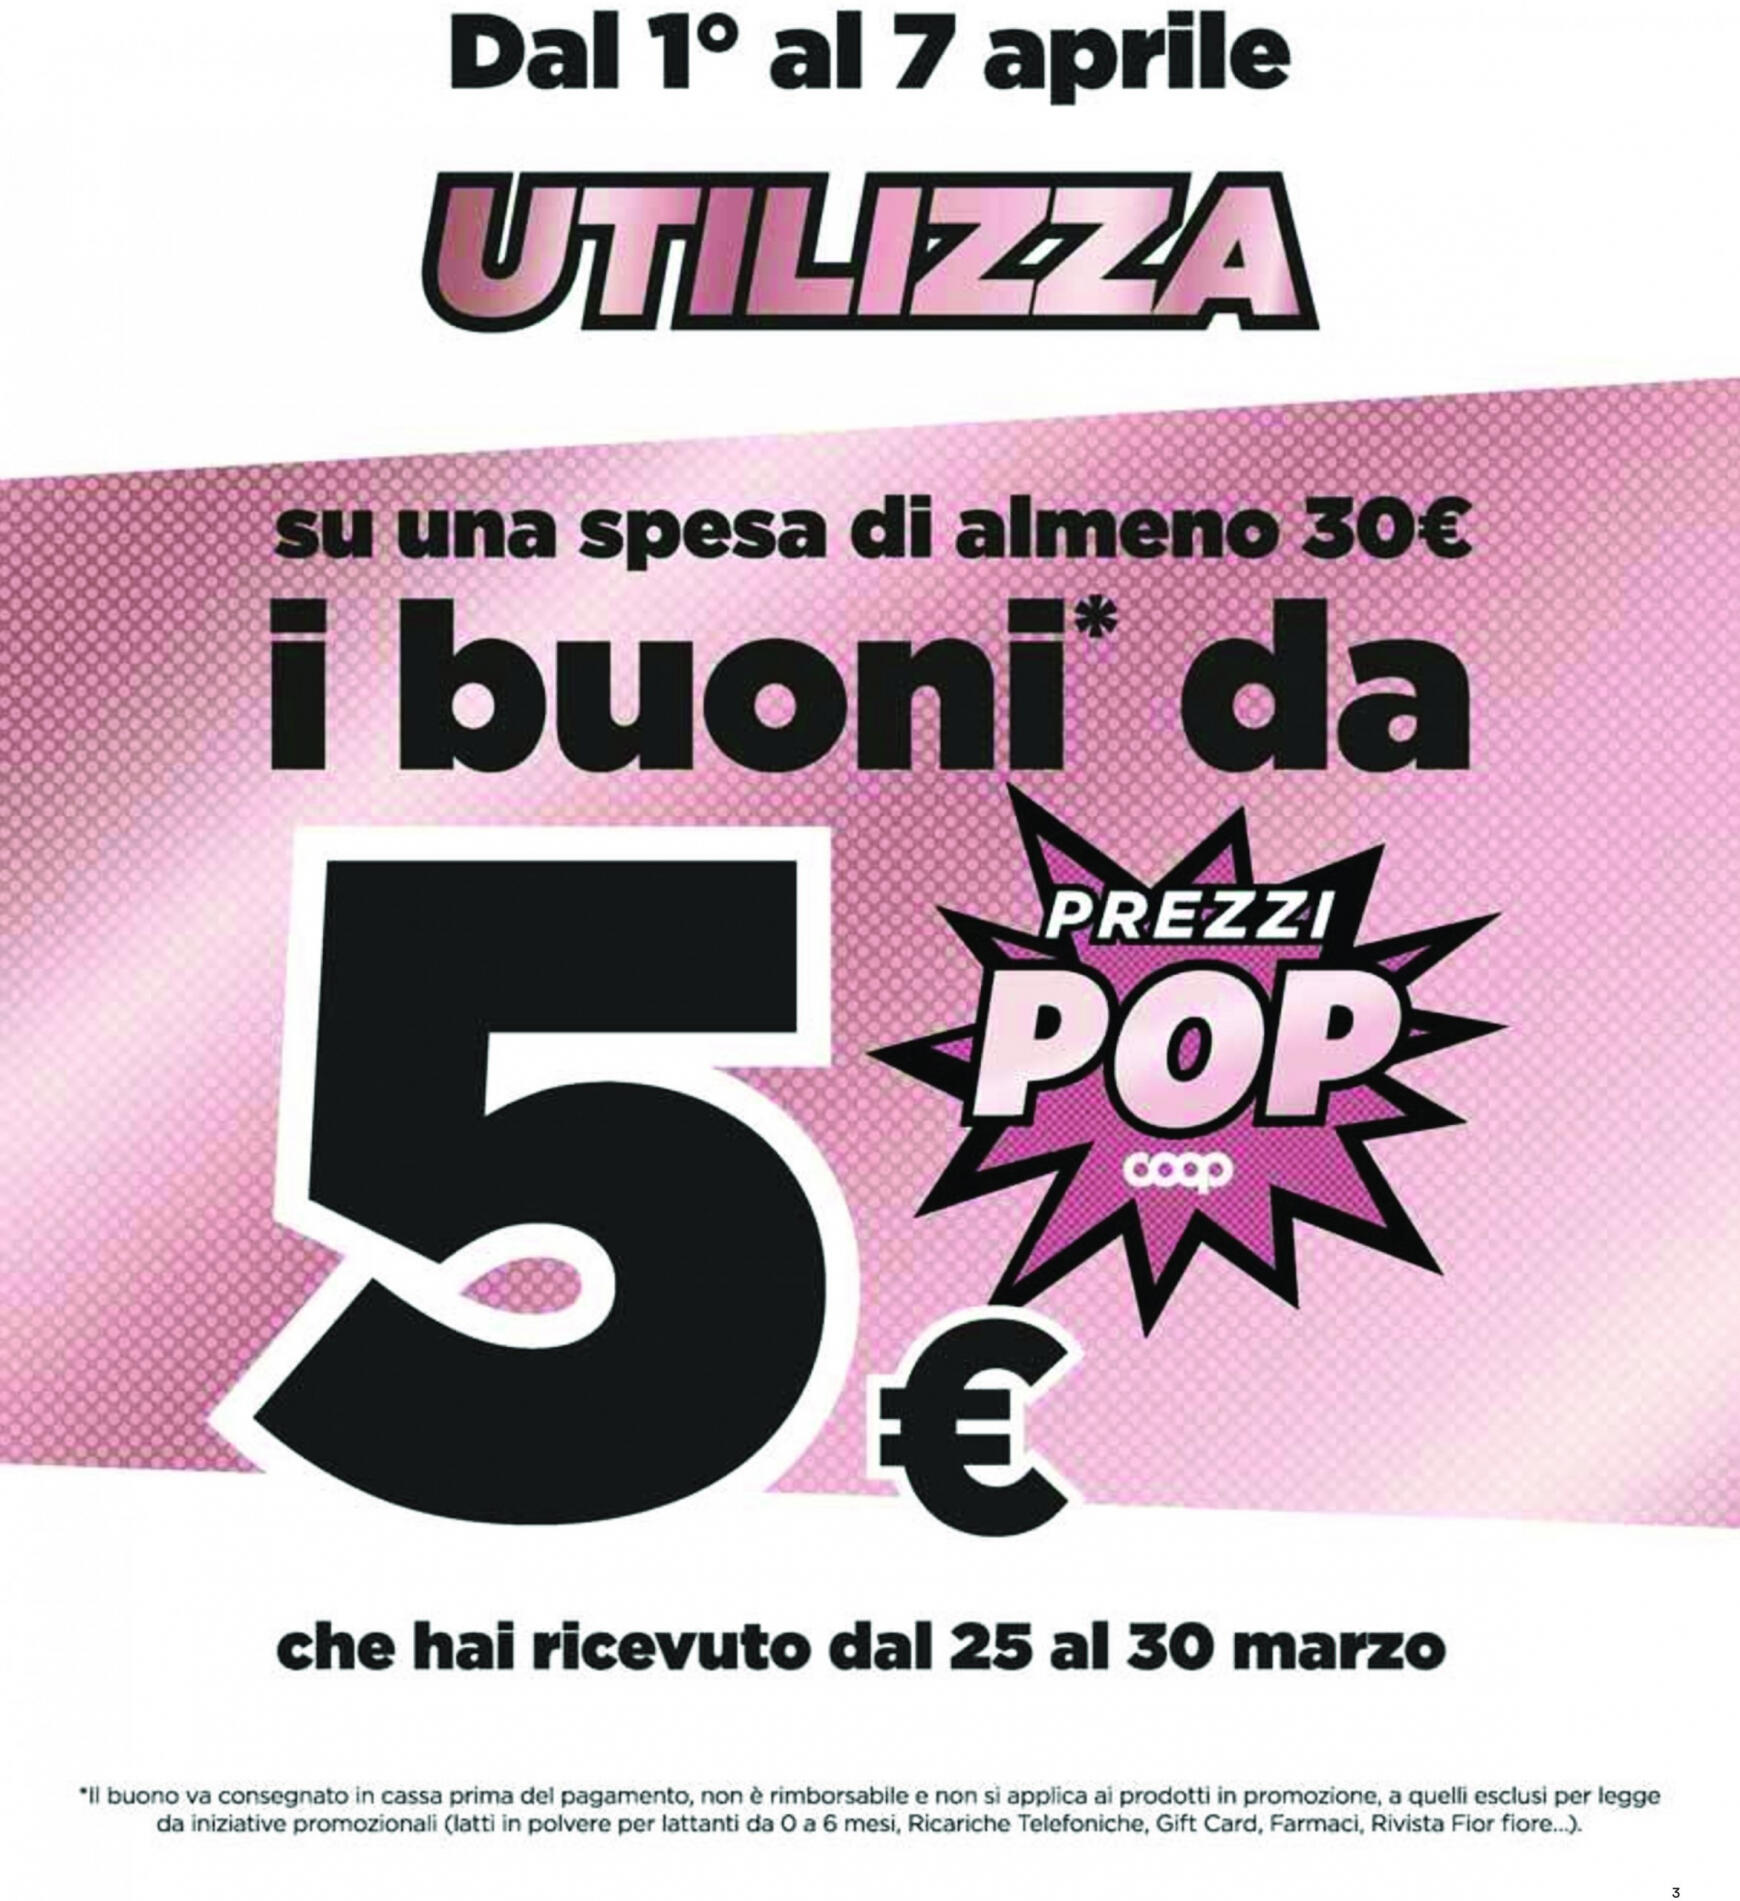 coop - Nuovo volantino Coop 02.04. - 17.04. - page: 3